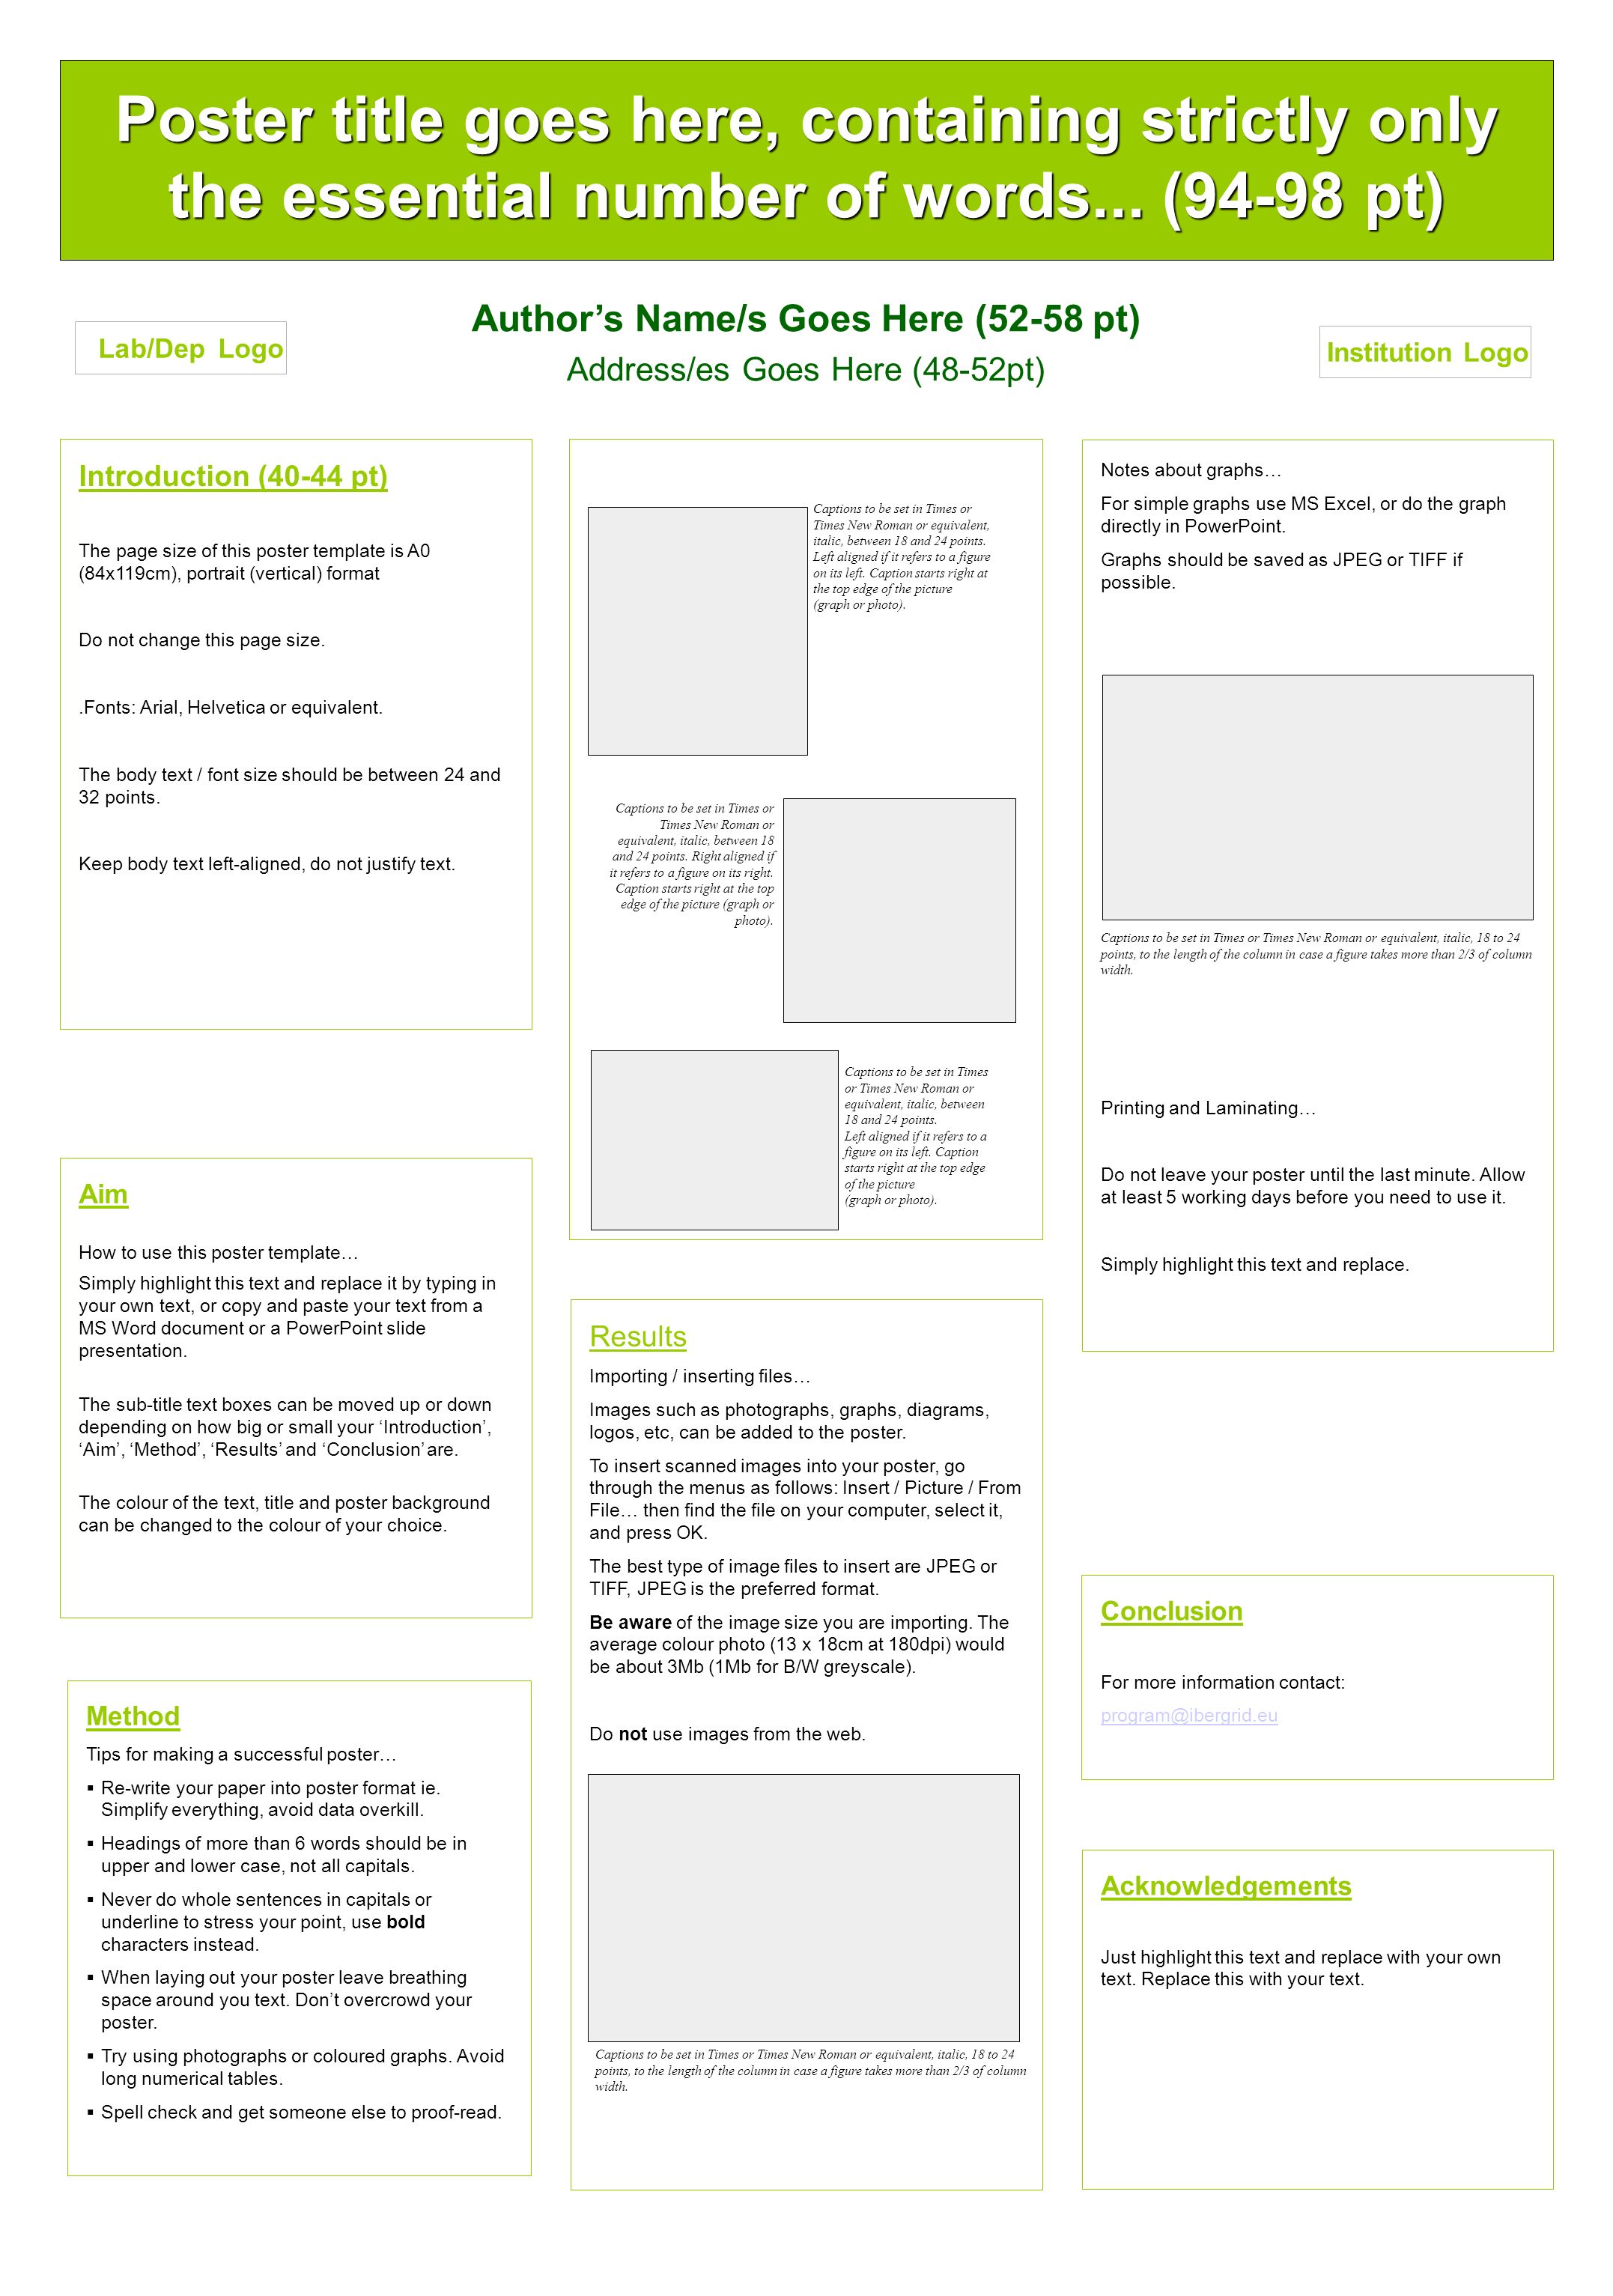 Introduction (40-44 pt) The page size of this poster template is A0 (84x119cm), portrait (vertical) format Do not change this page size..Fonts: Arial, Helvetica or equivalent.